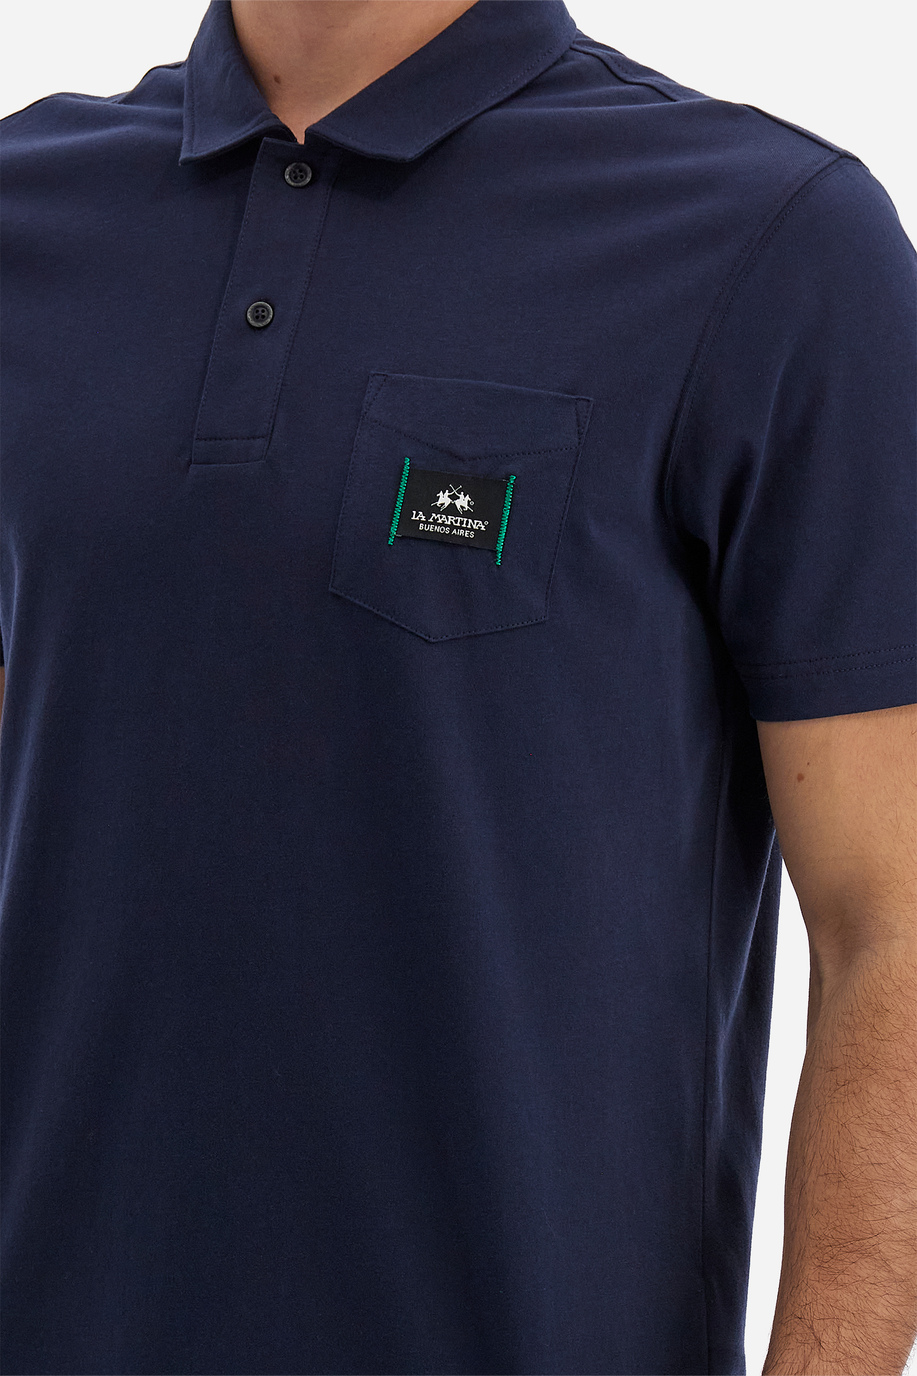 Men's short-sleeved polo shirt Logos with flat mini pocket in solid color - Vasant - Giftguide | La Martina - Official Online Shop